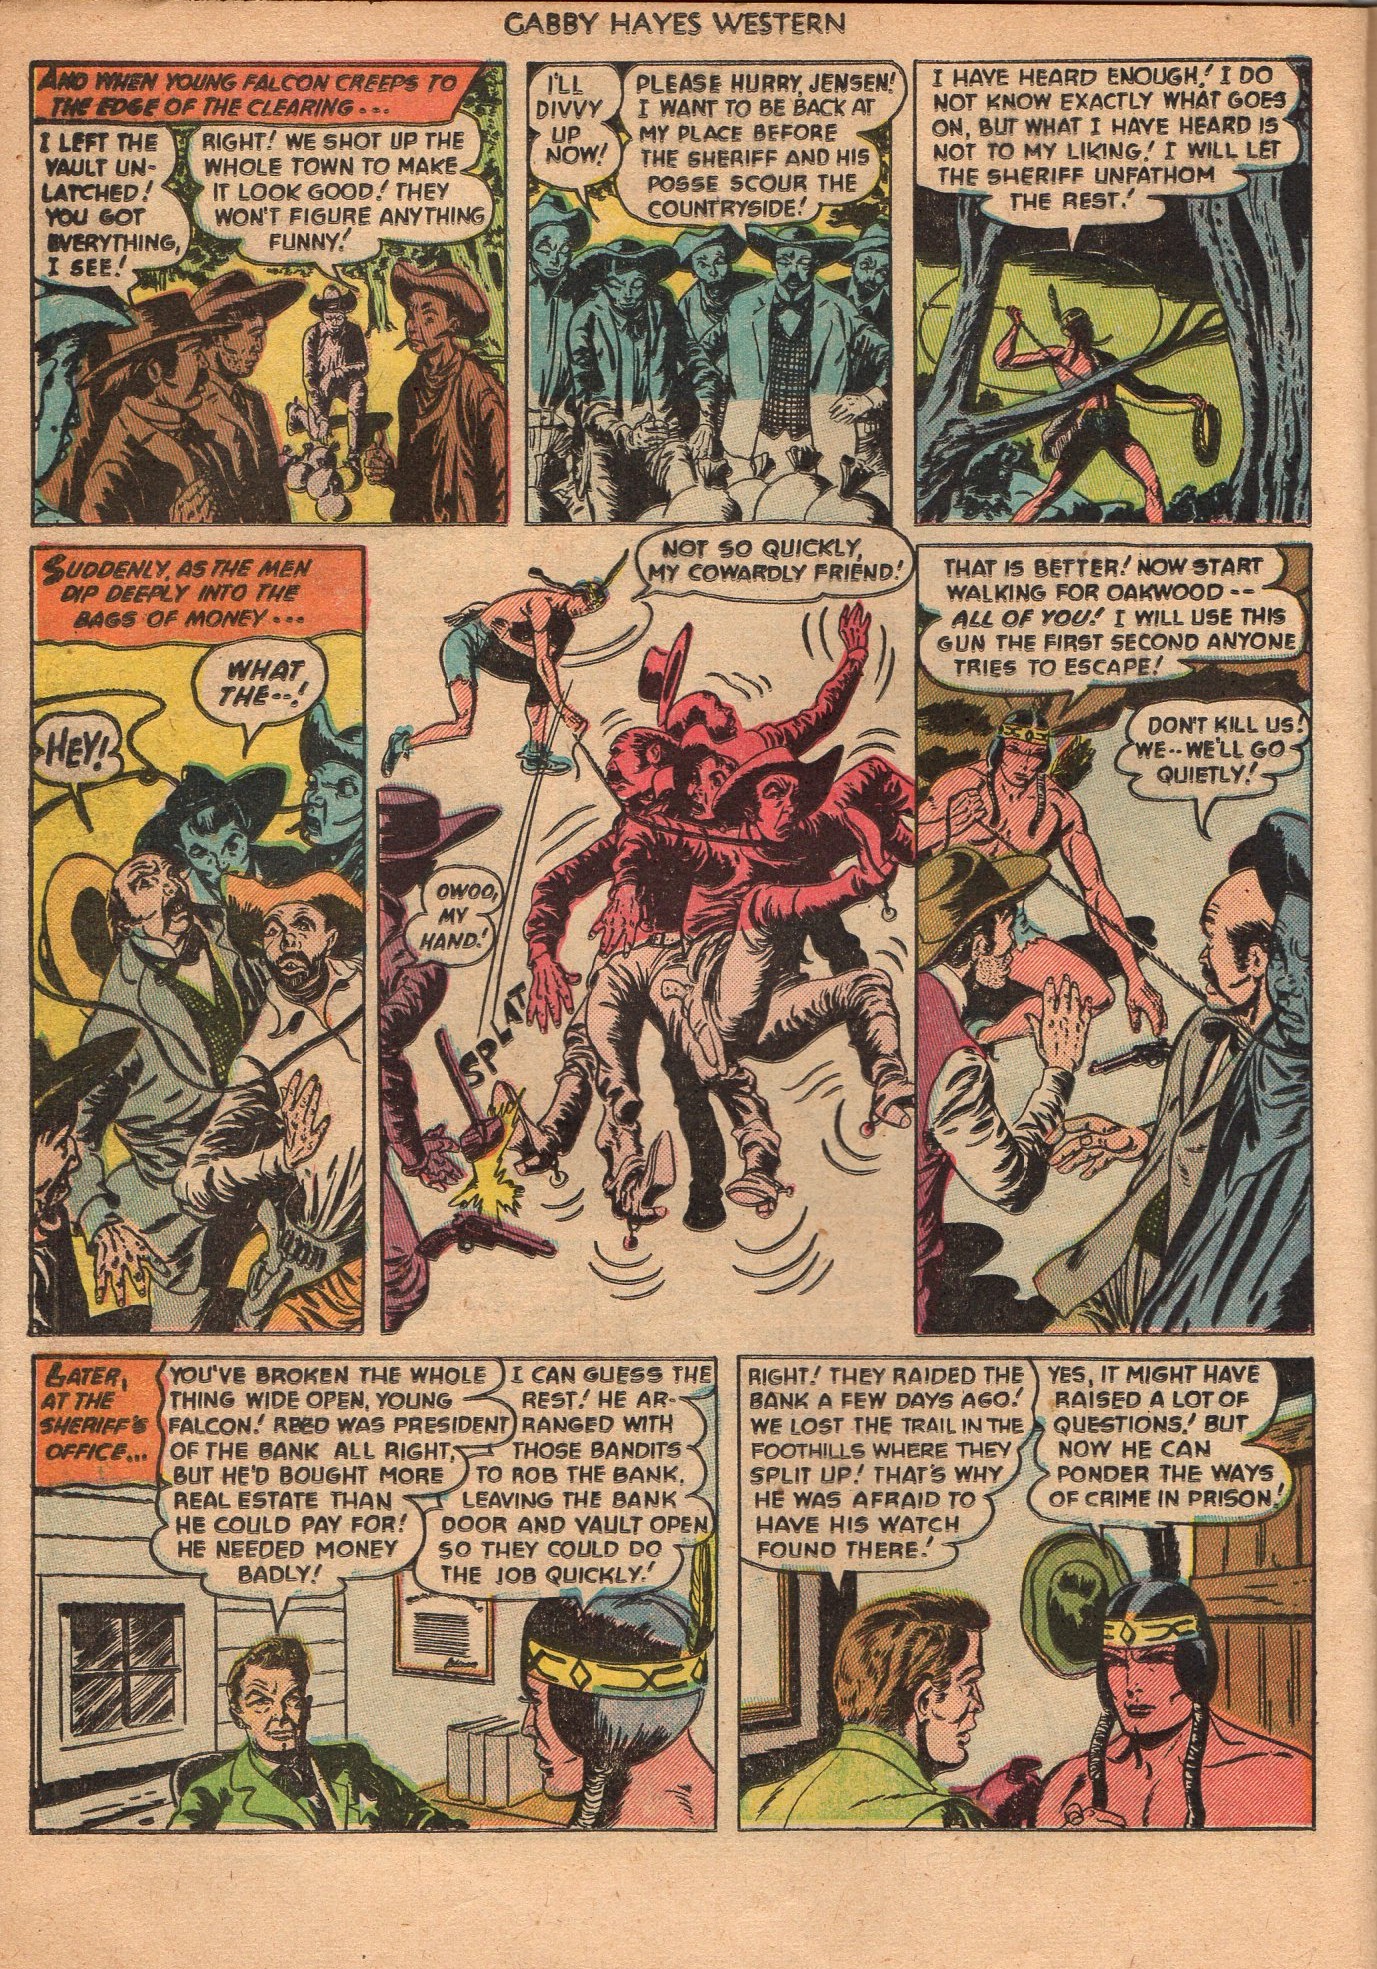 Read online Gabby Hayes Western comic -  Issue #46 - 24